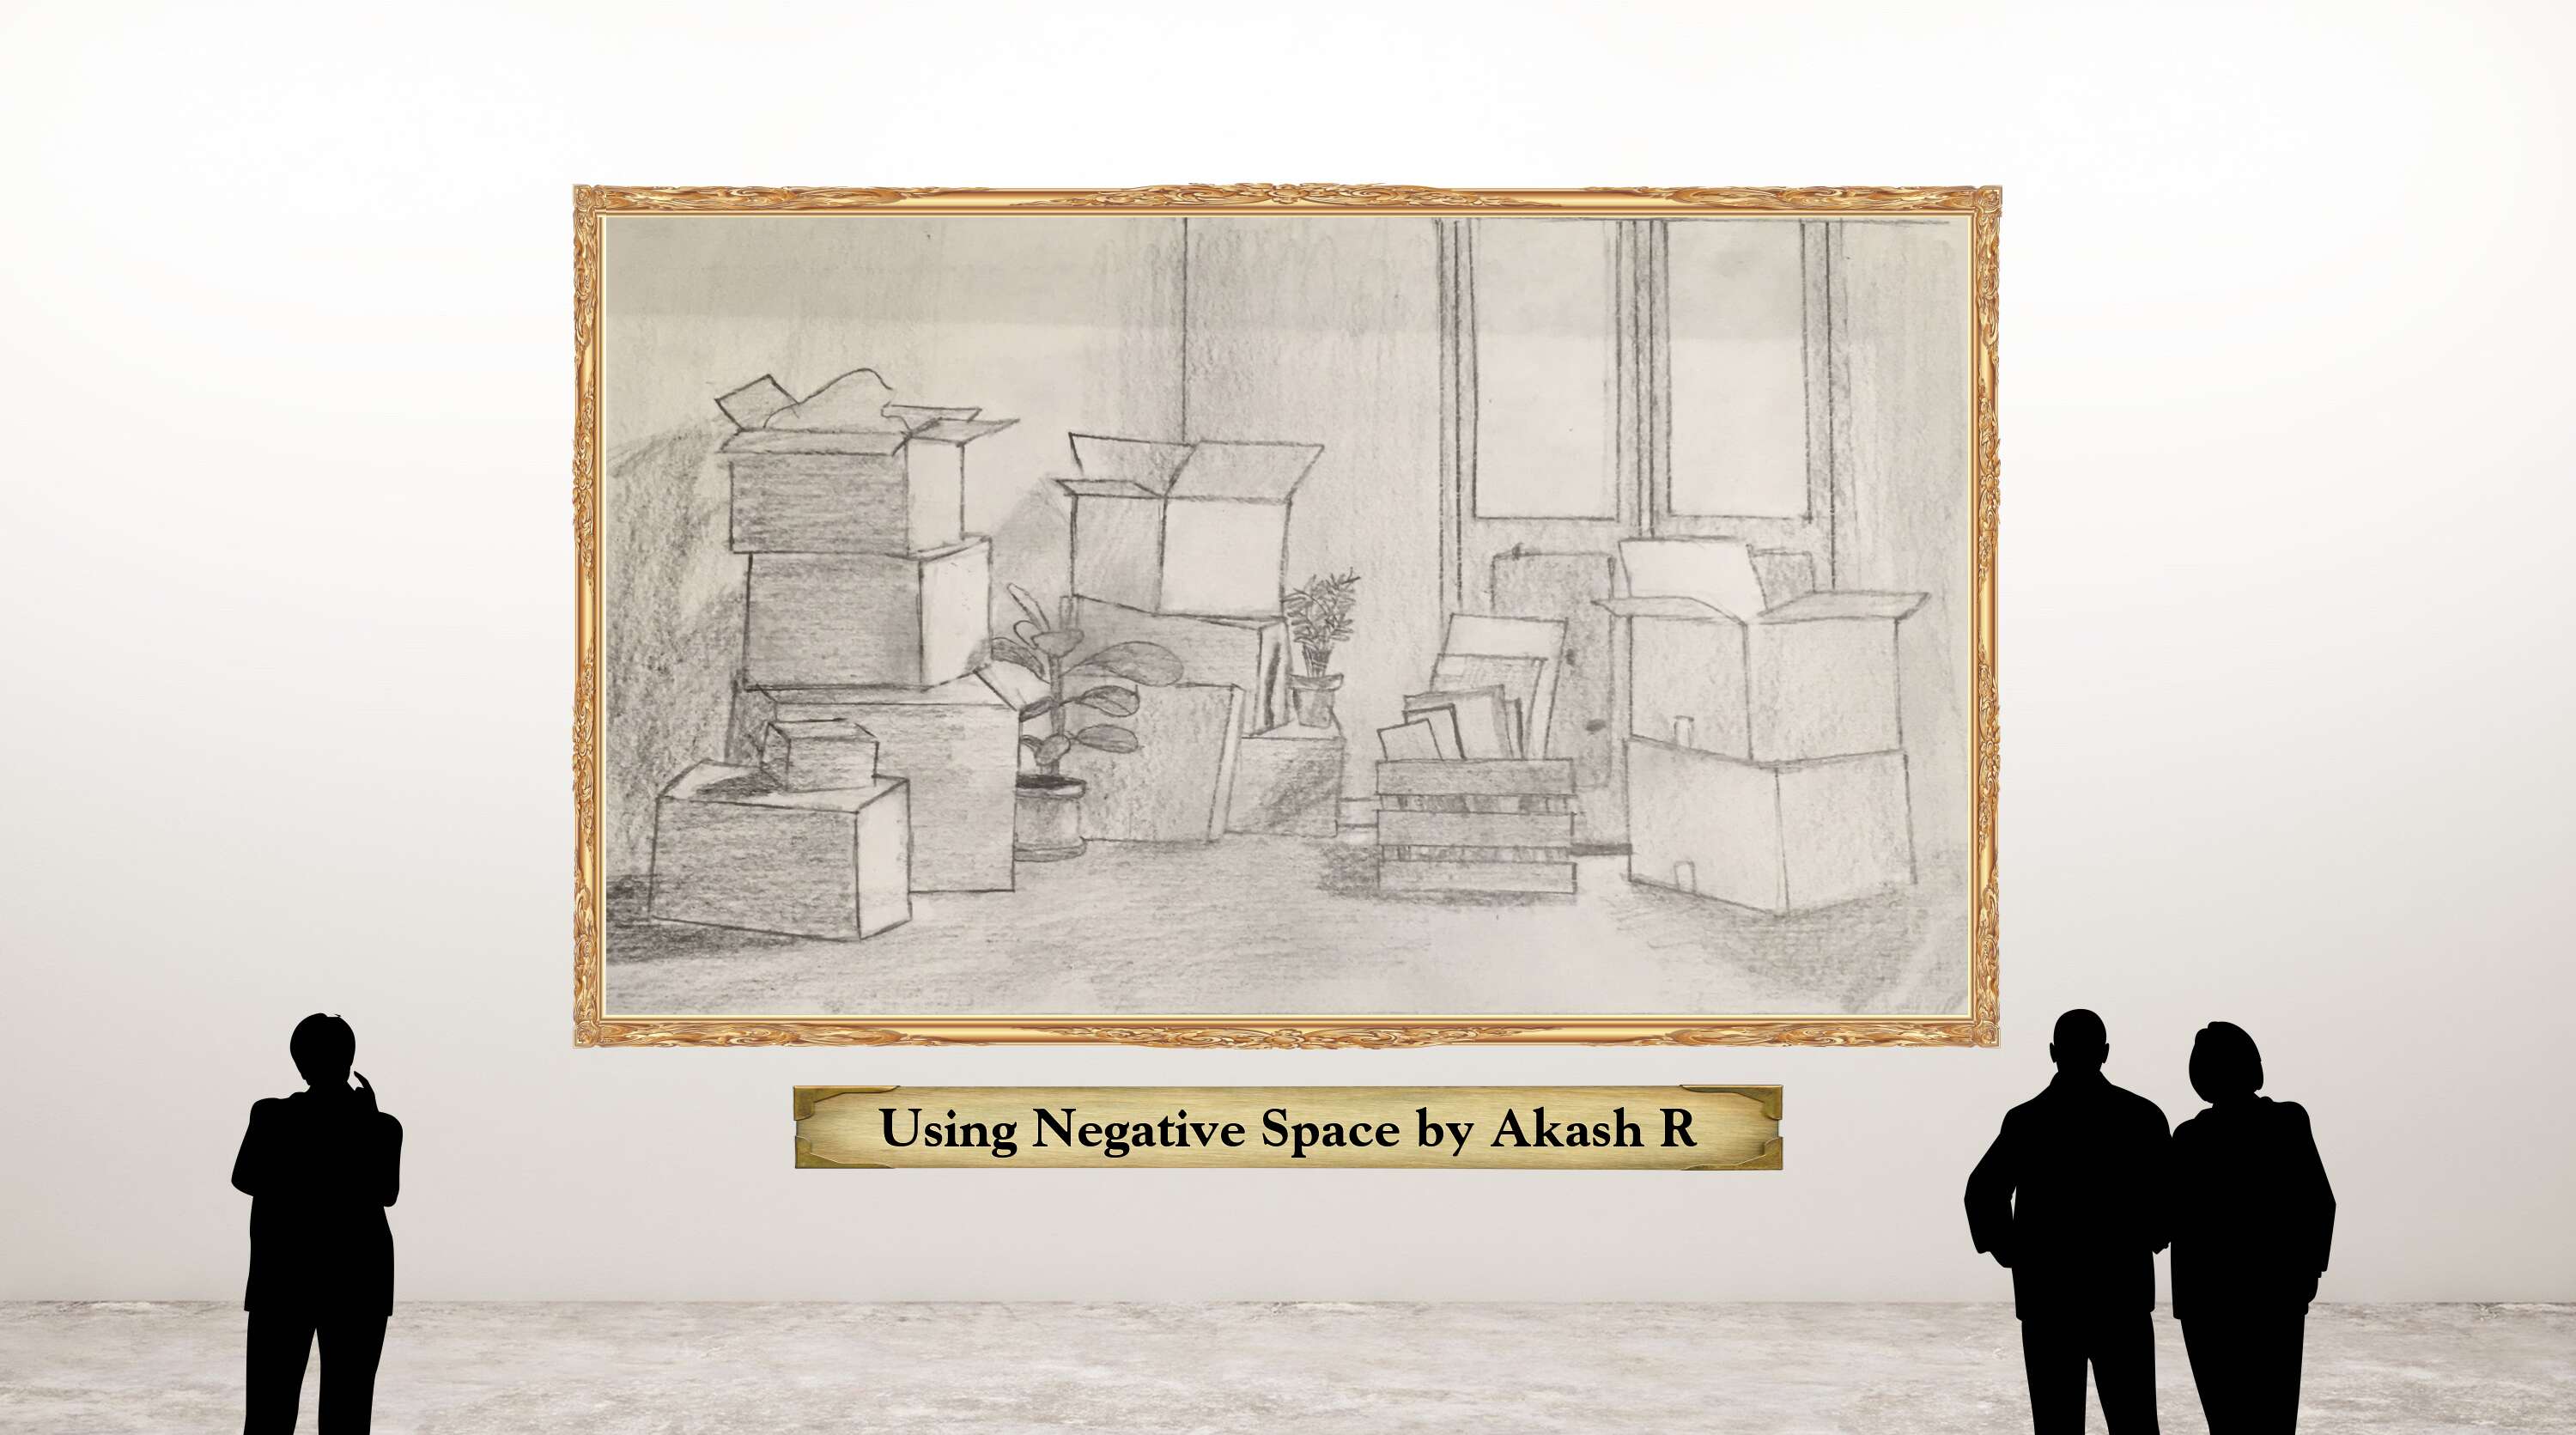 Using Negative Space by Akash R